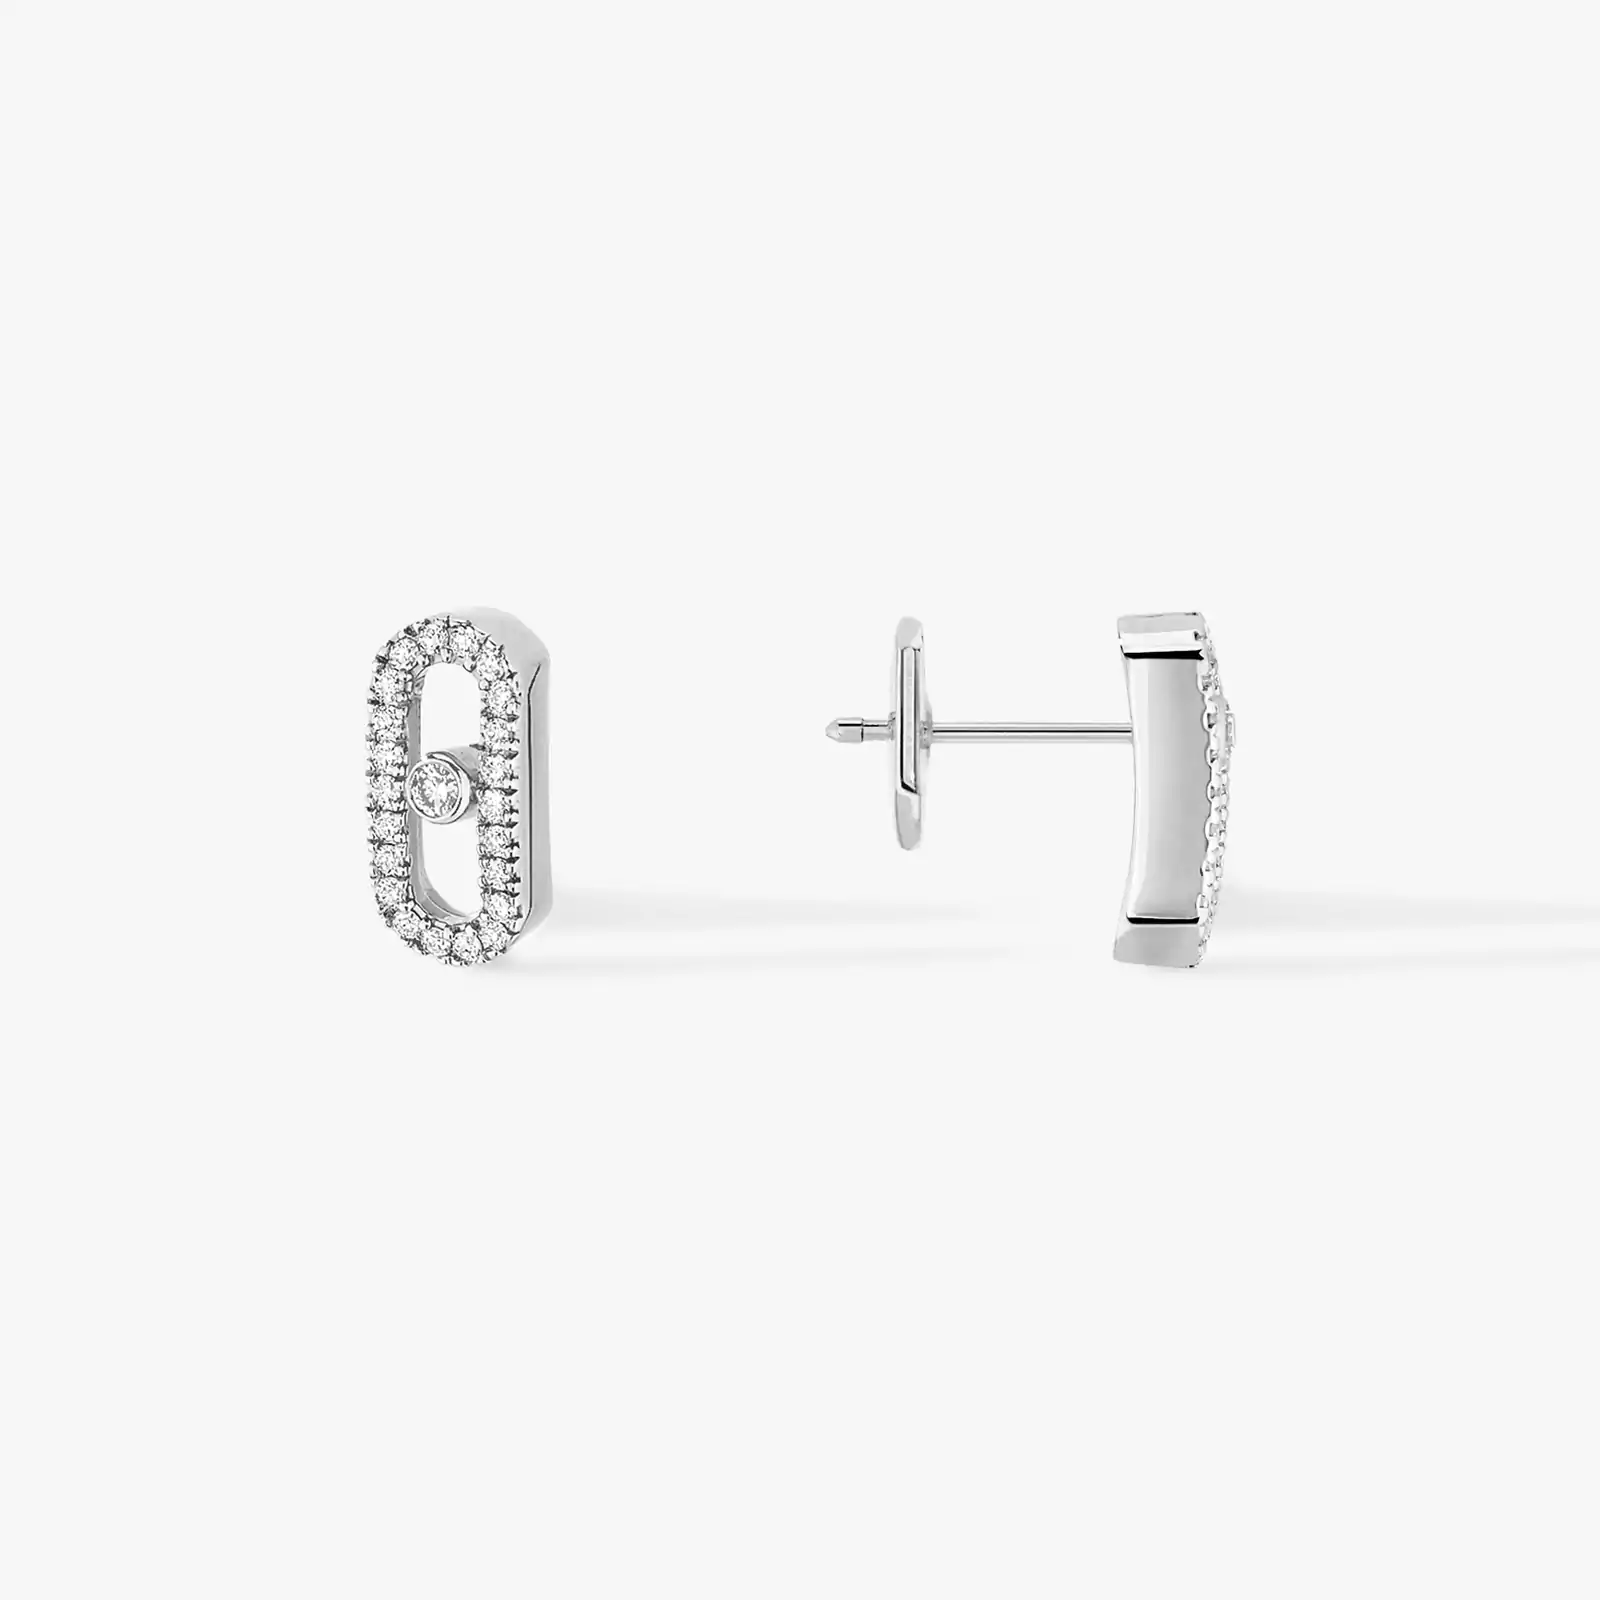 Move Uno White Gold For Her Diamond Earrings 05634-WG